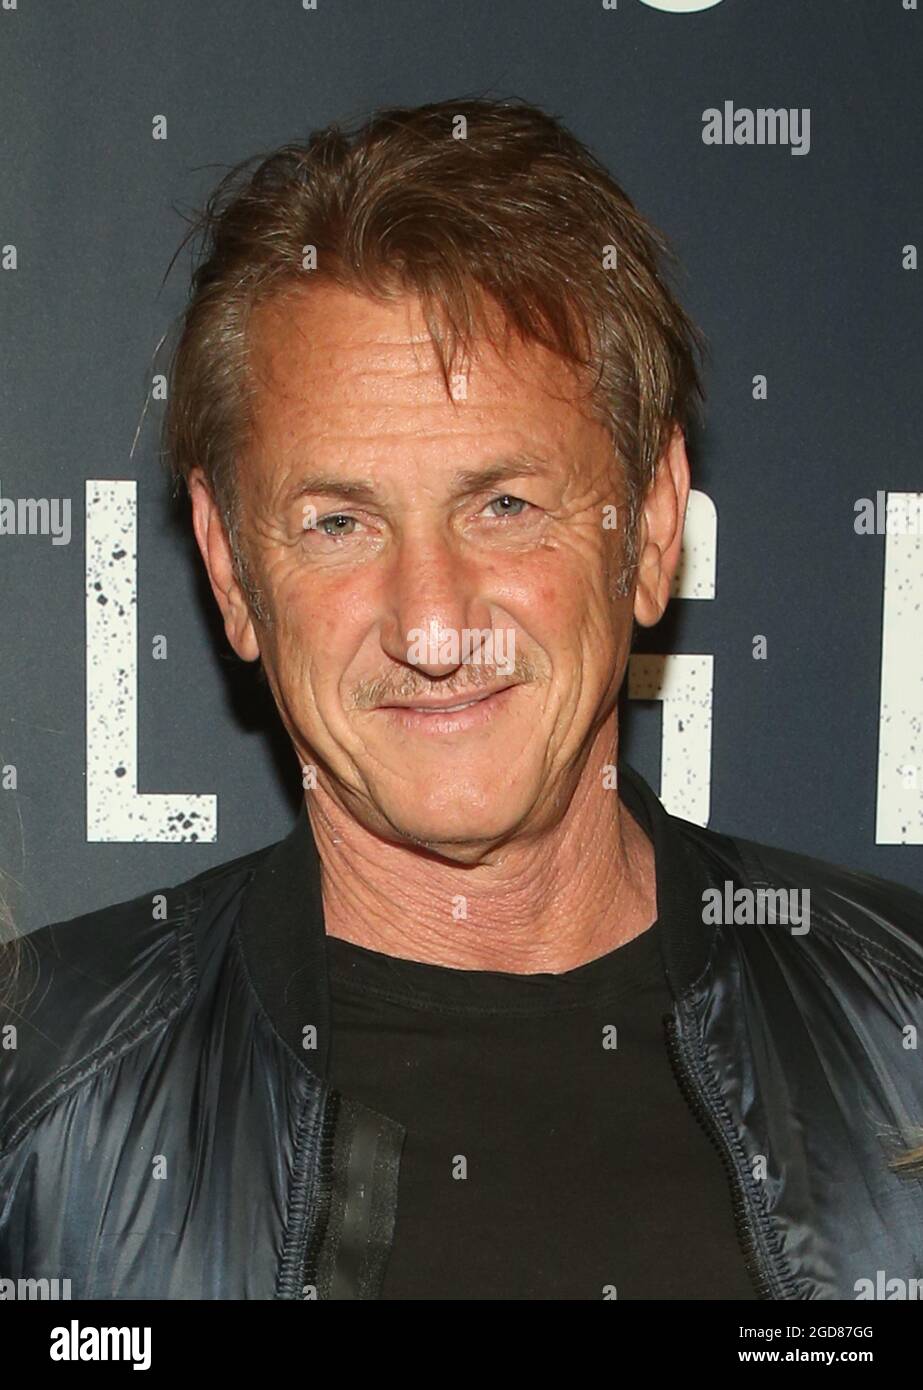 Los Angeles, Ca. 11th Aug, 2021. Sean Penn at the film screening of Flag Day on August 11, 2021 at the Directors Guild of America in Los Angeles, California. Credit: Faye Sadou/Media Punch/Alamy Live News Stock Photo